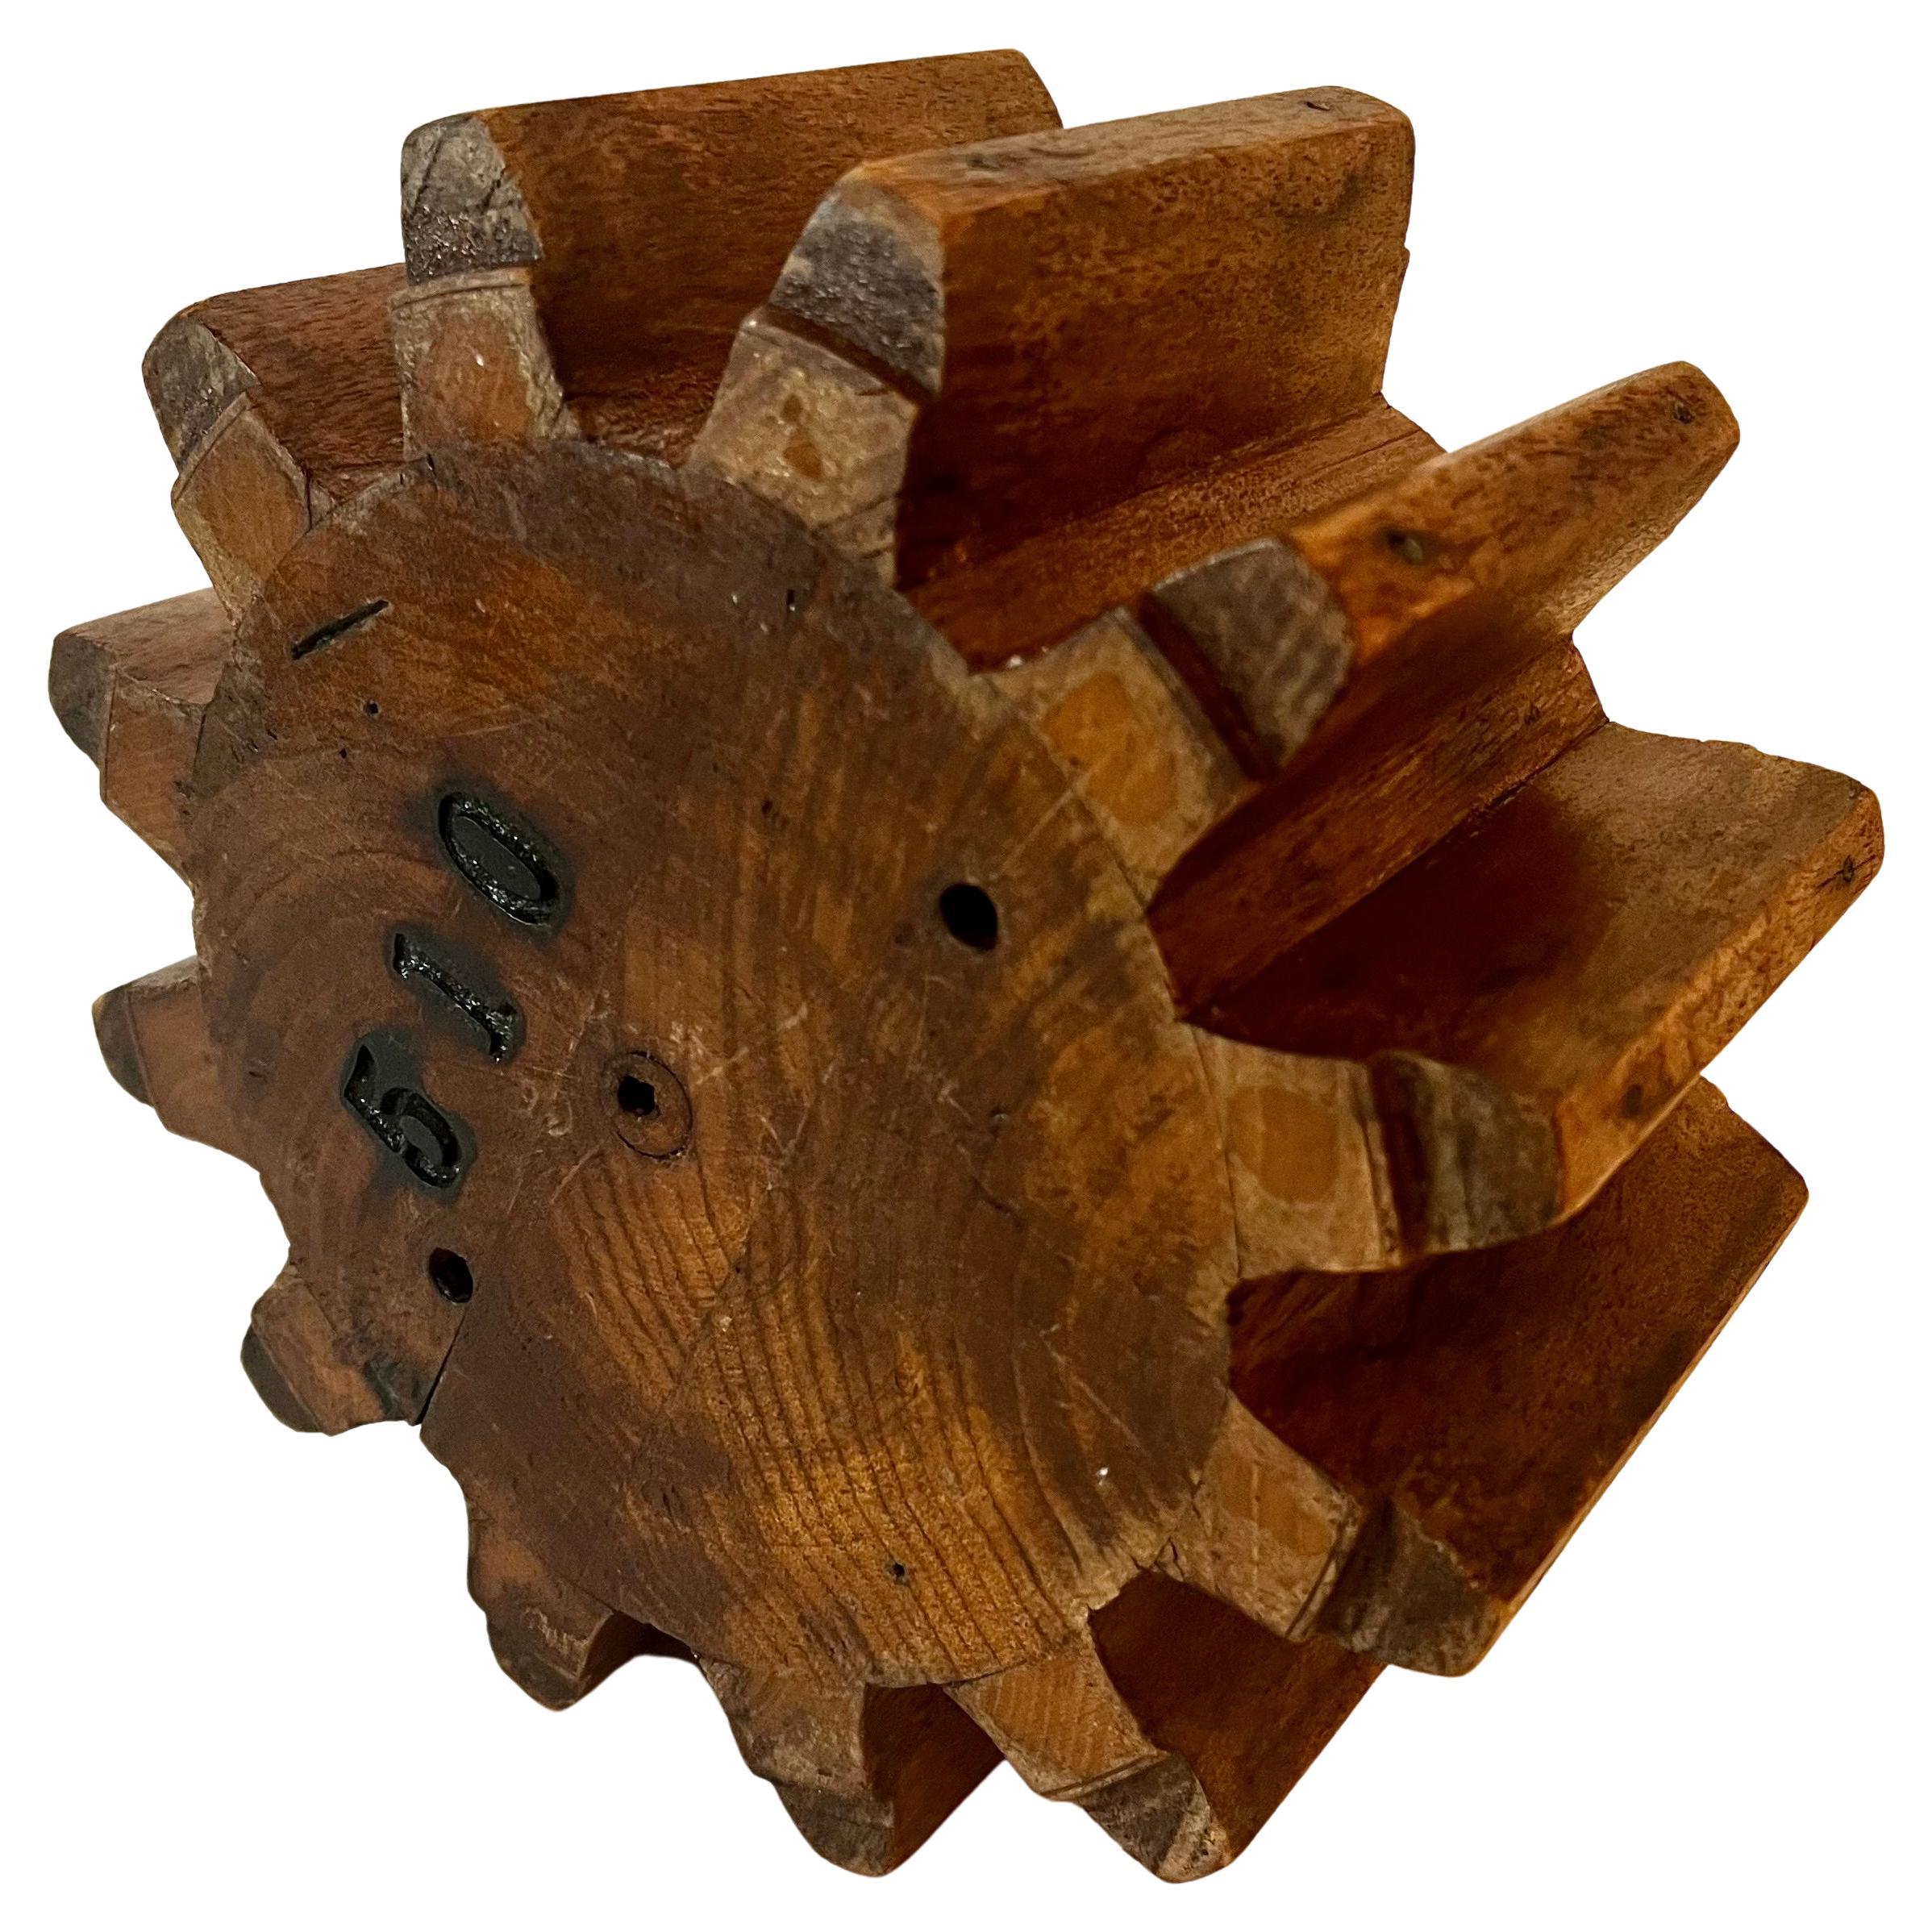 Wooden Cog or Gear Part